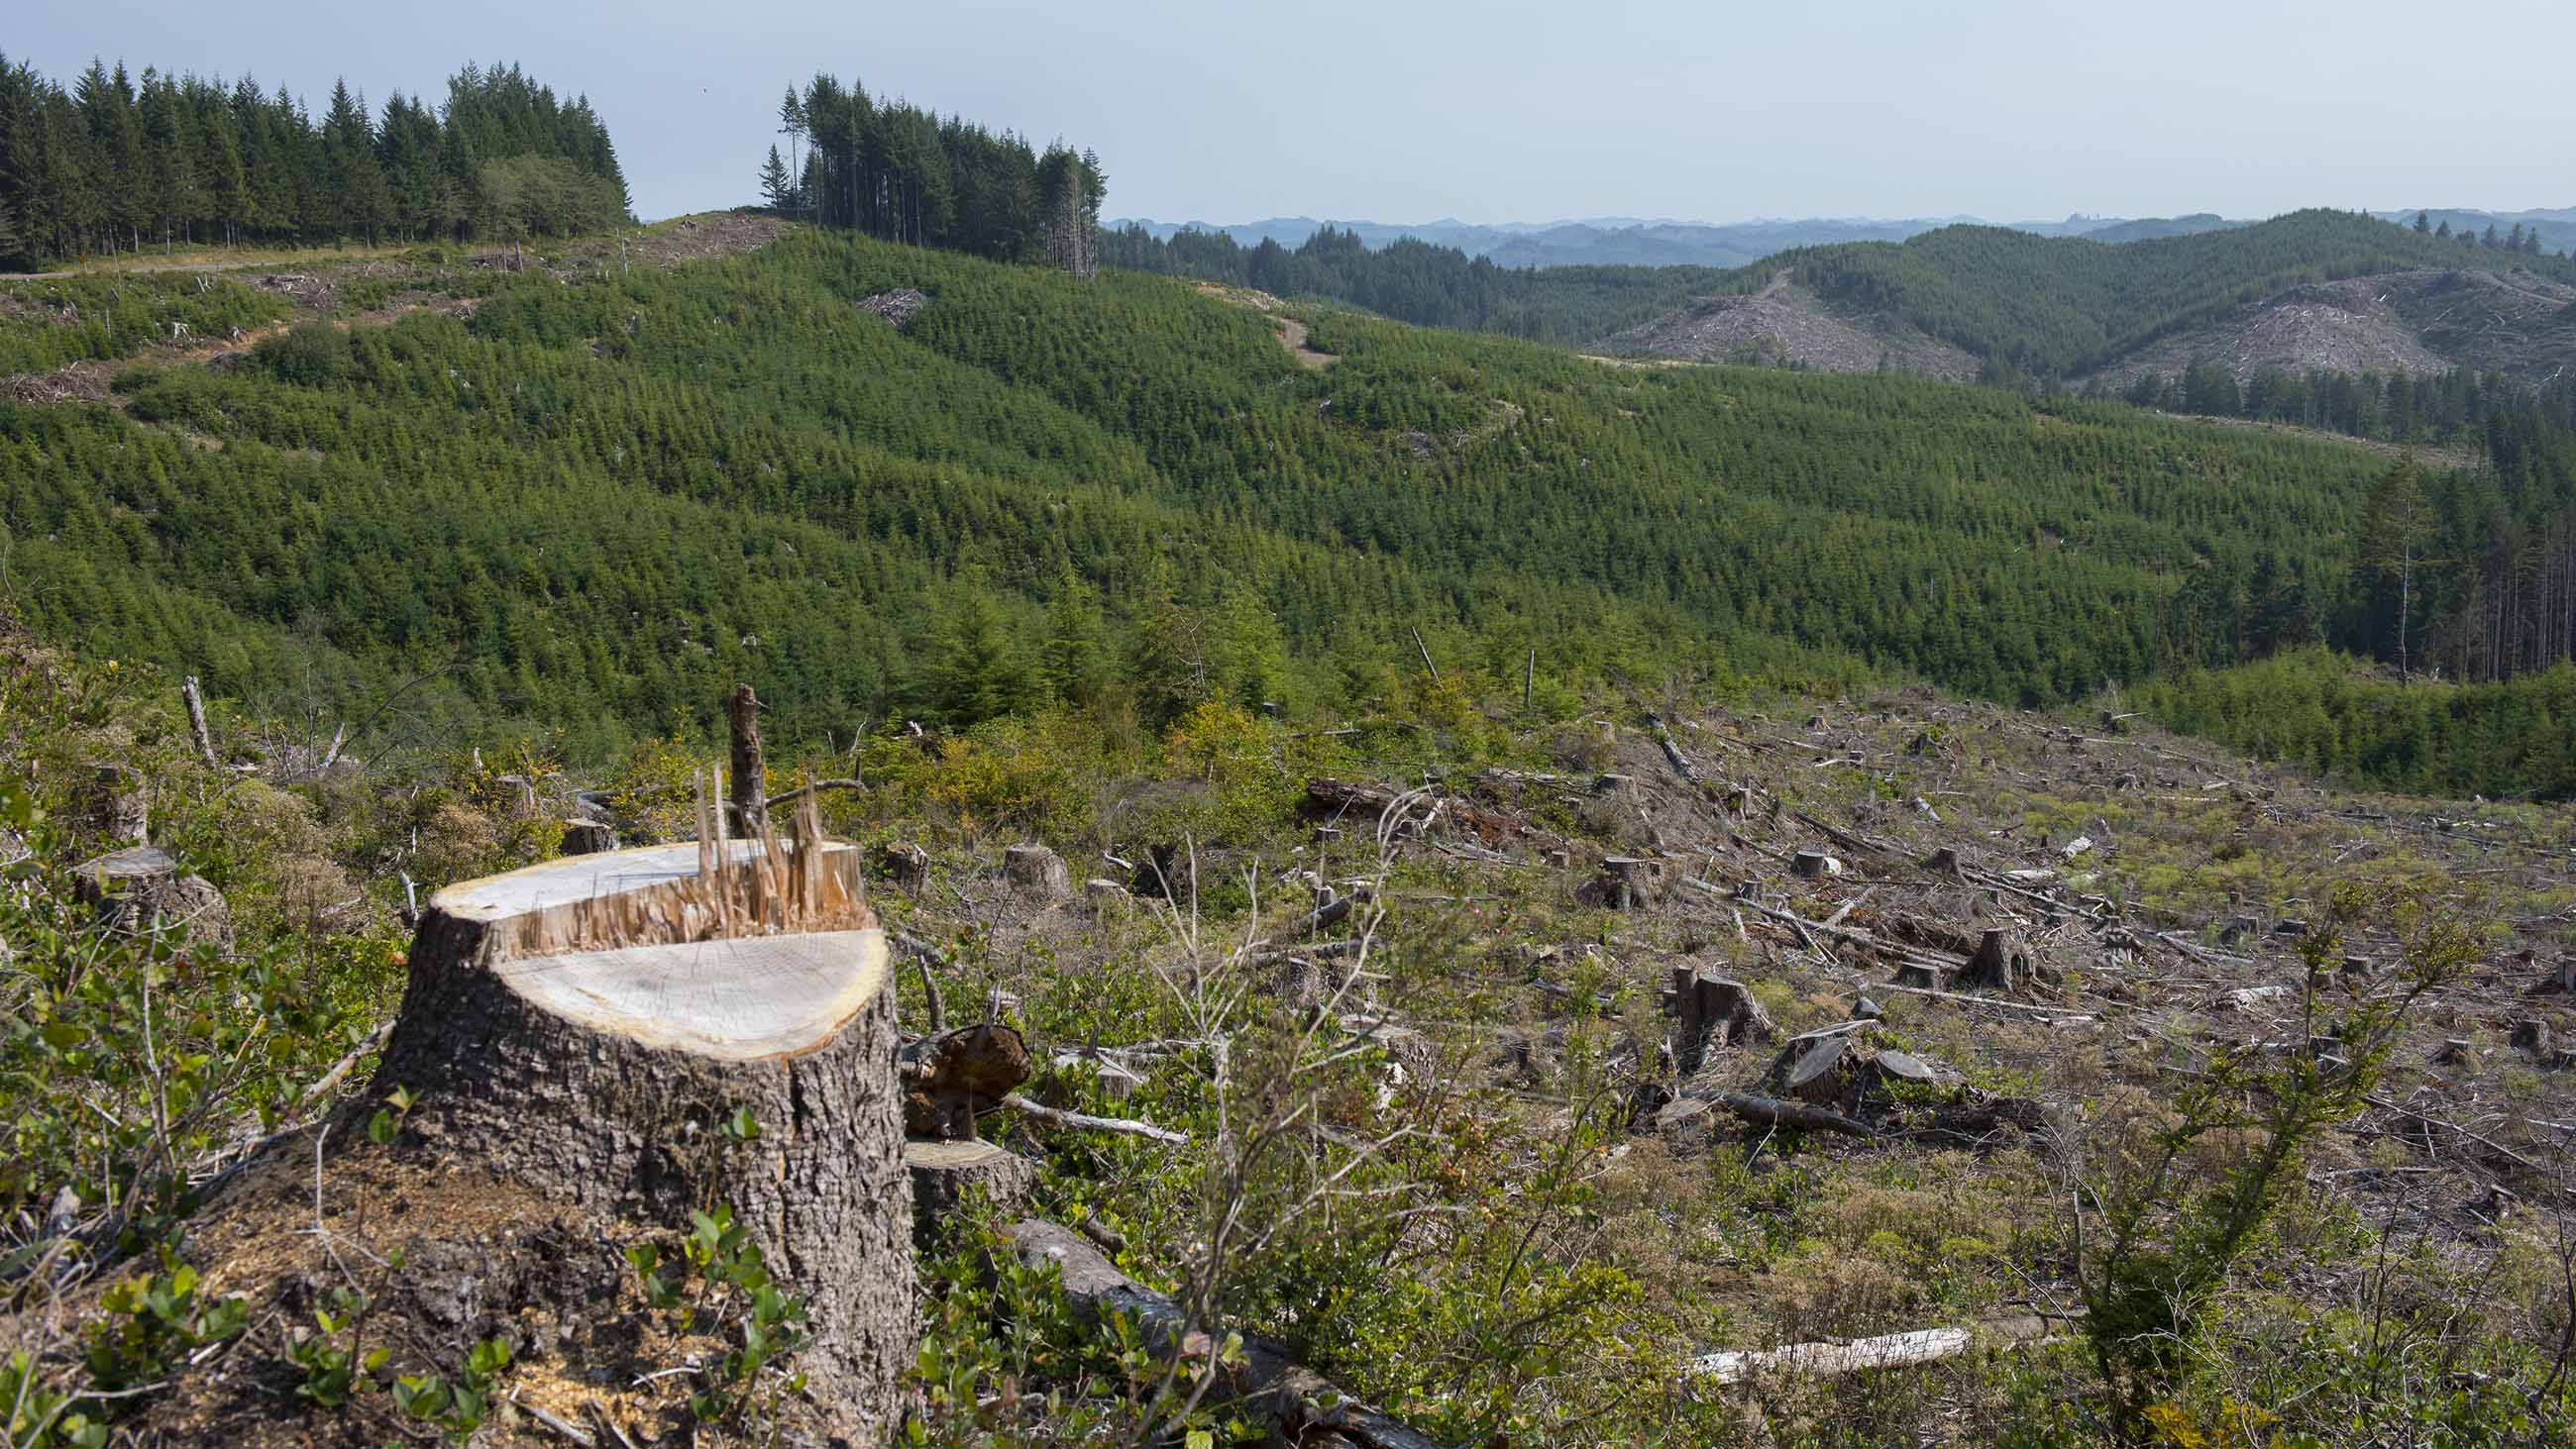 Reckless clearcutting of forests is one thing. Responsible management and harvesting is quite another.